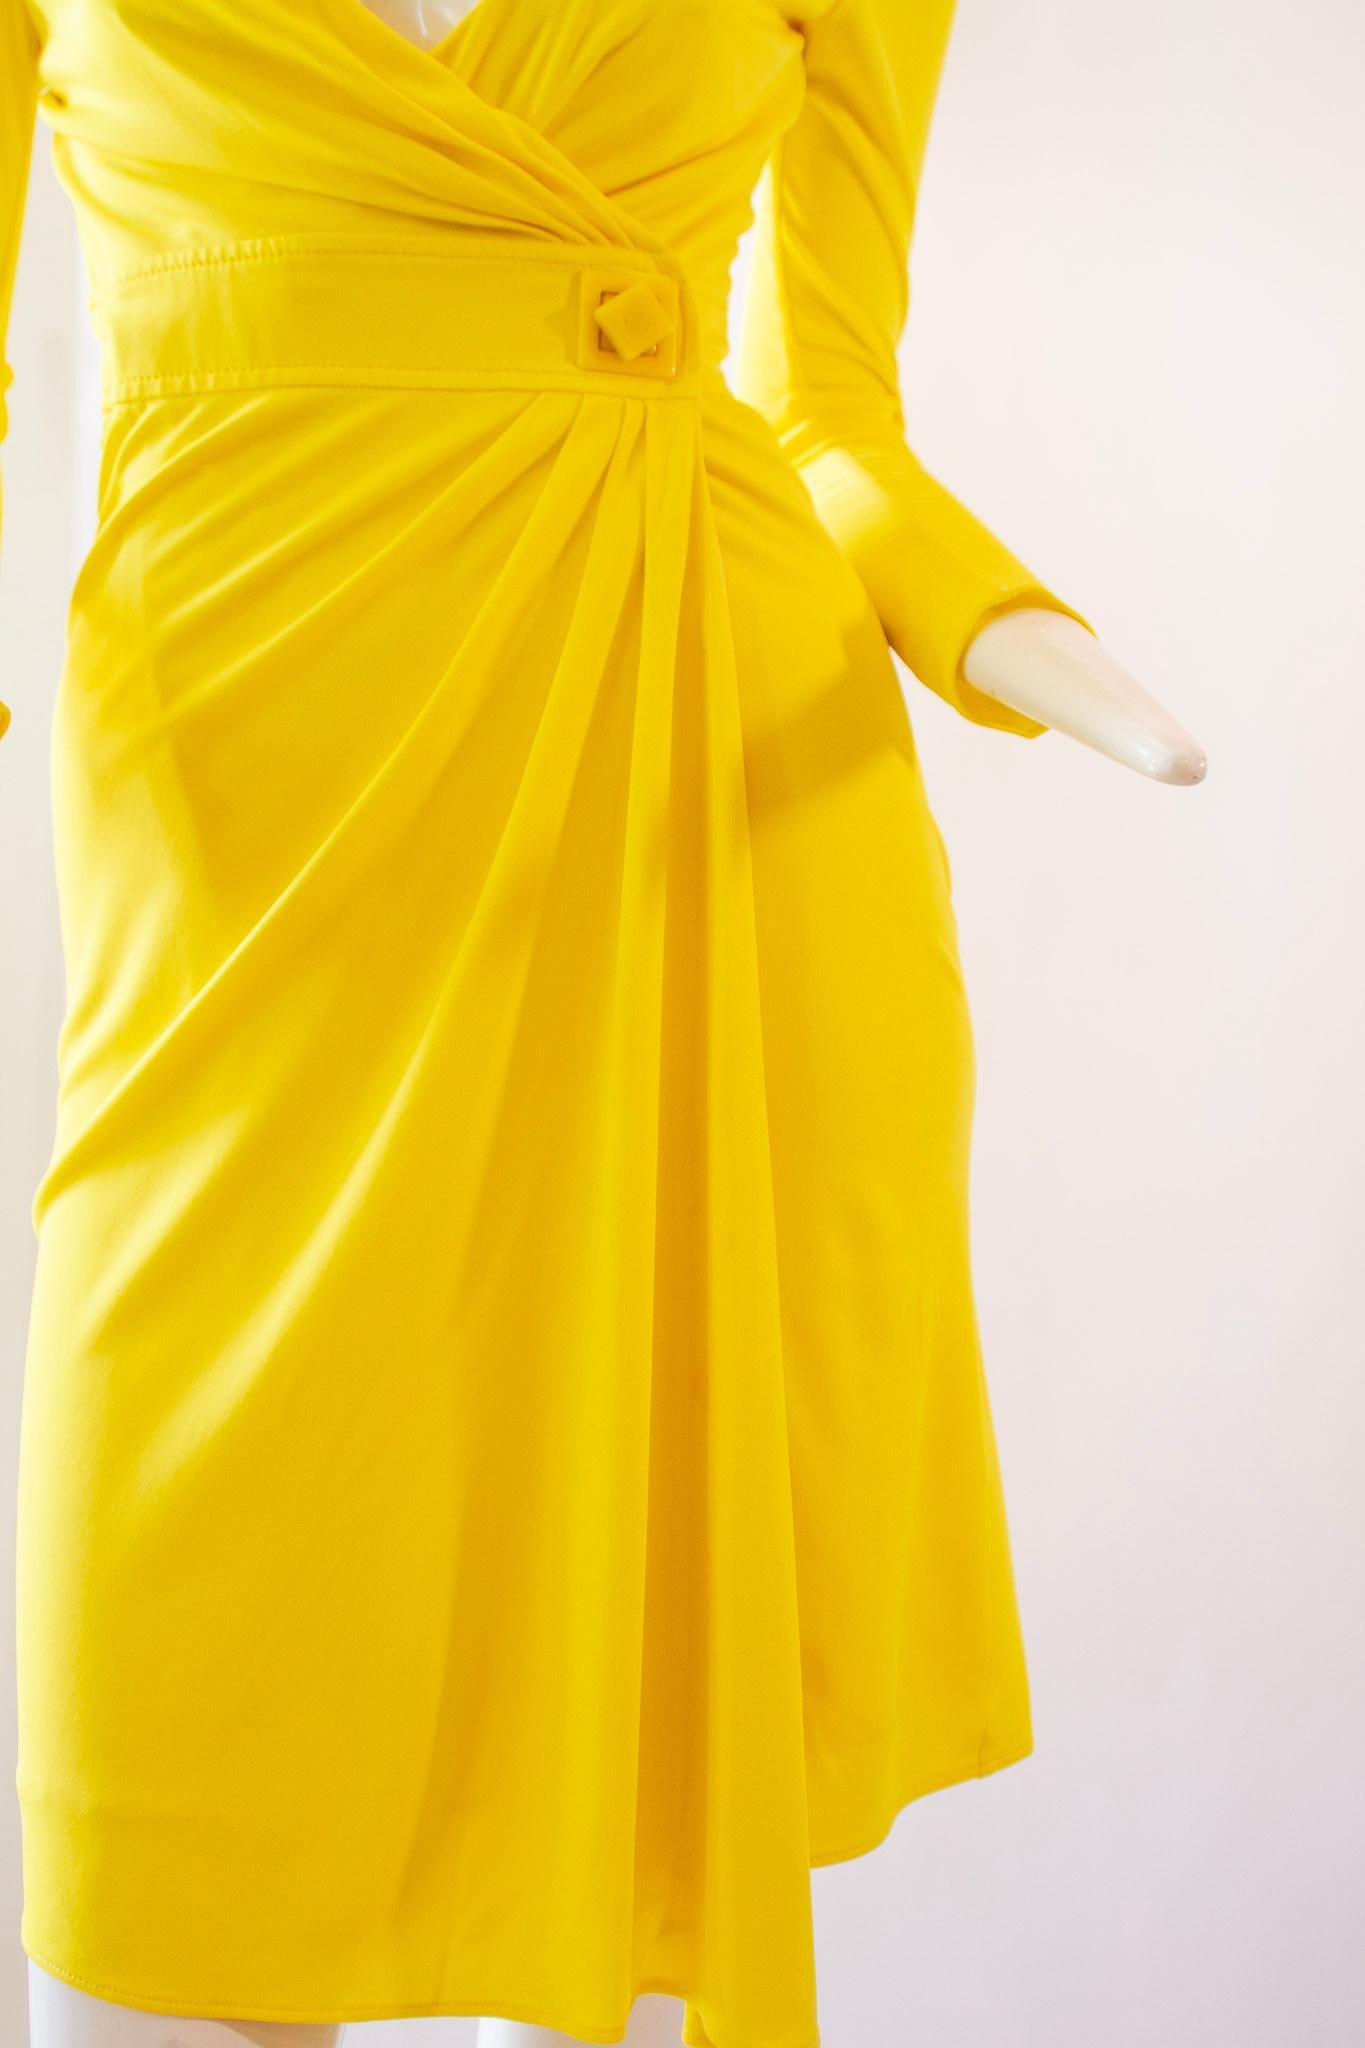 GIANNI VERSACE, Canary Yellow Mid-Length Wrap Dress with Iconic Medusa Fastener For Sale 2